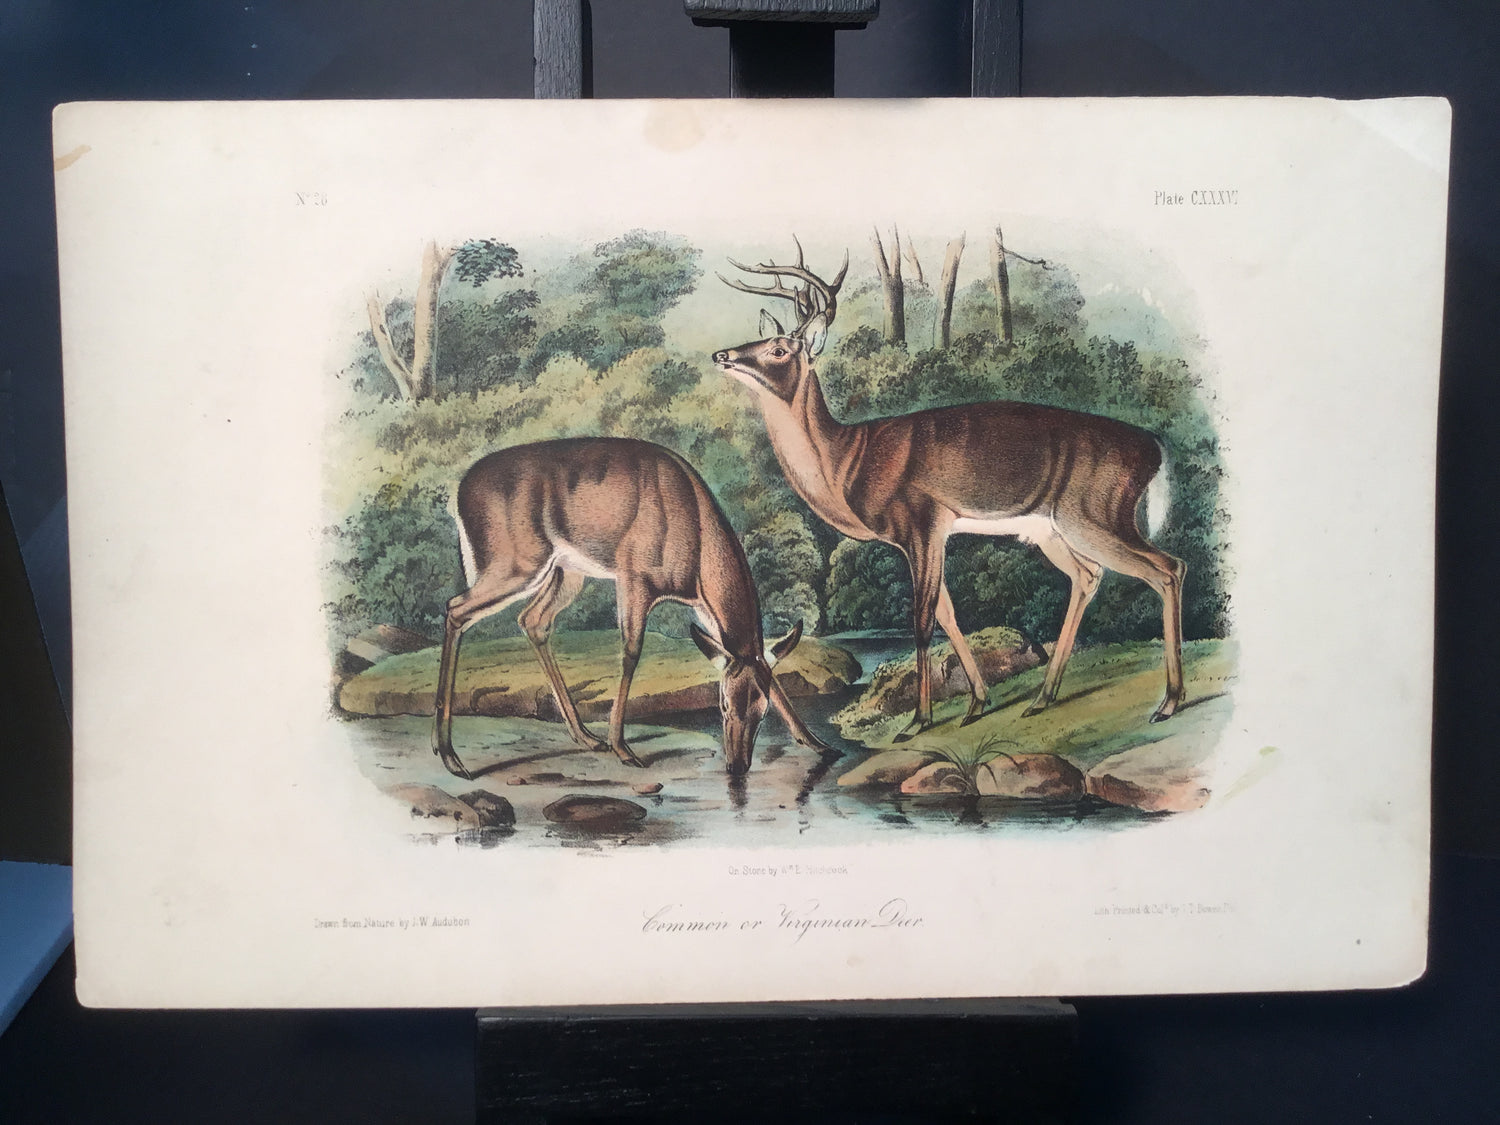 Lord-Hopkins Collection - Common or Virginian Deer